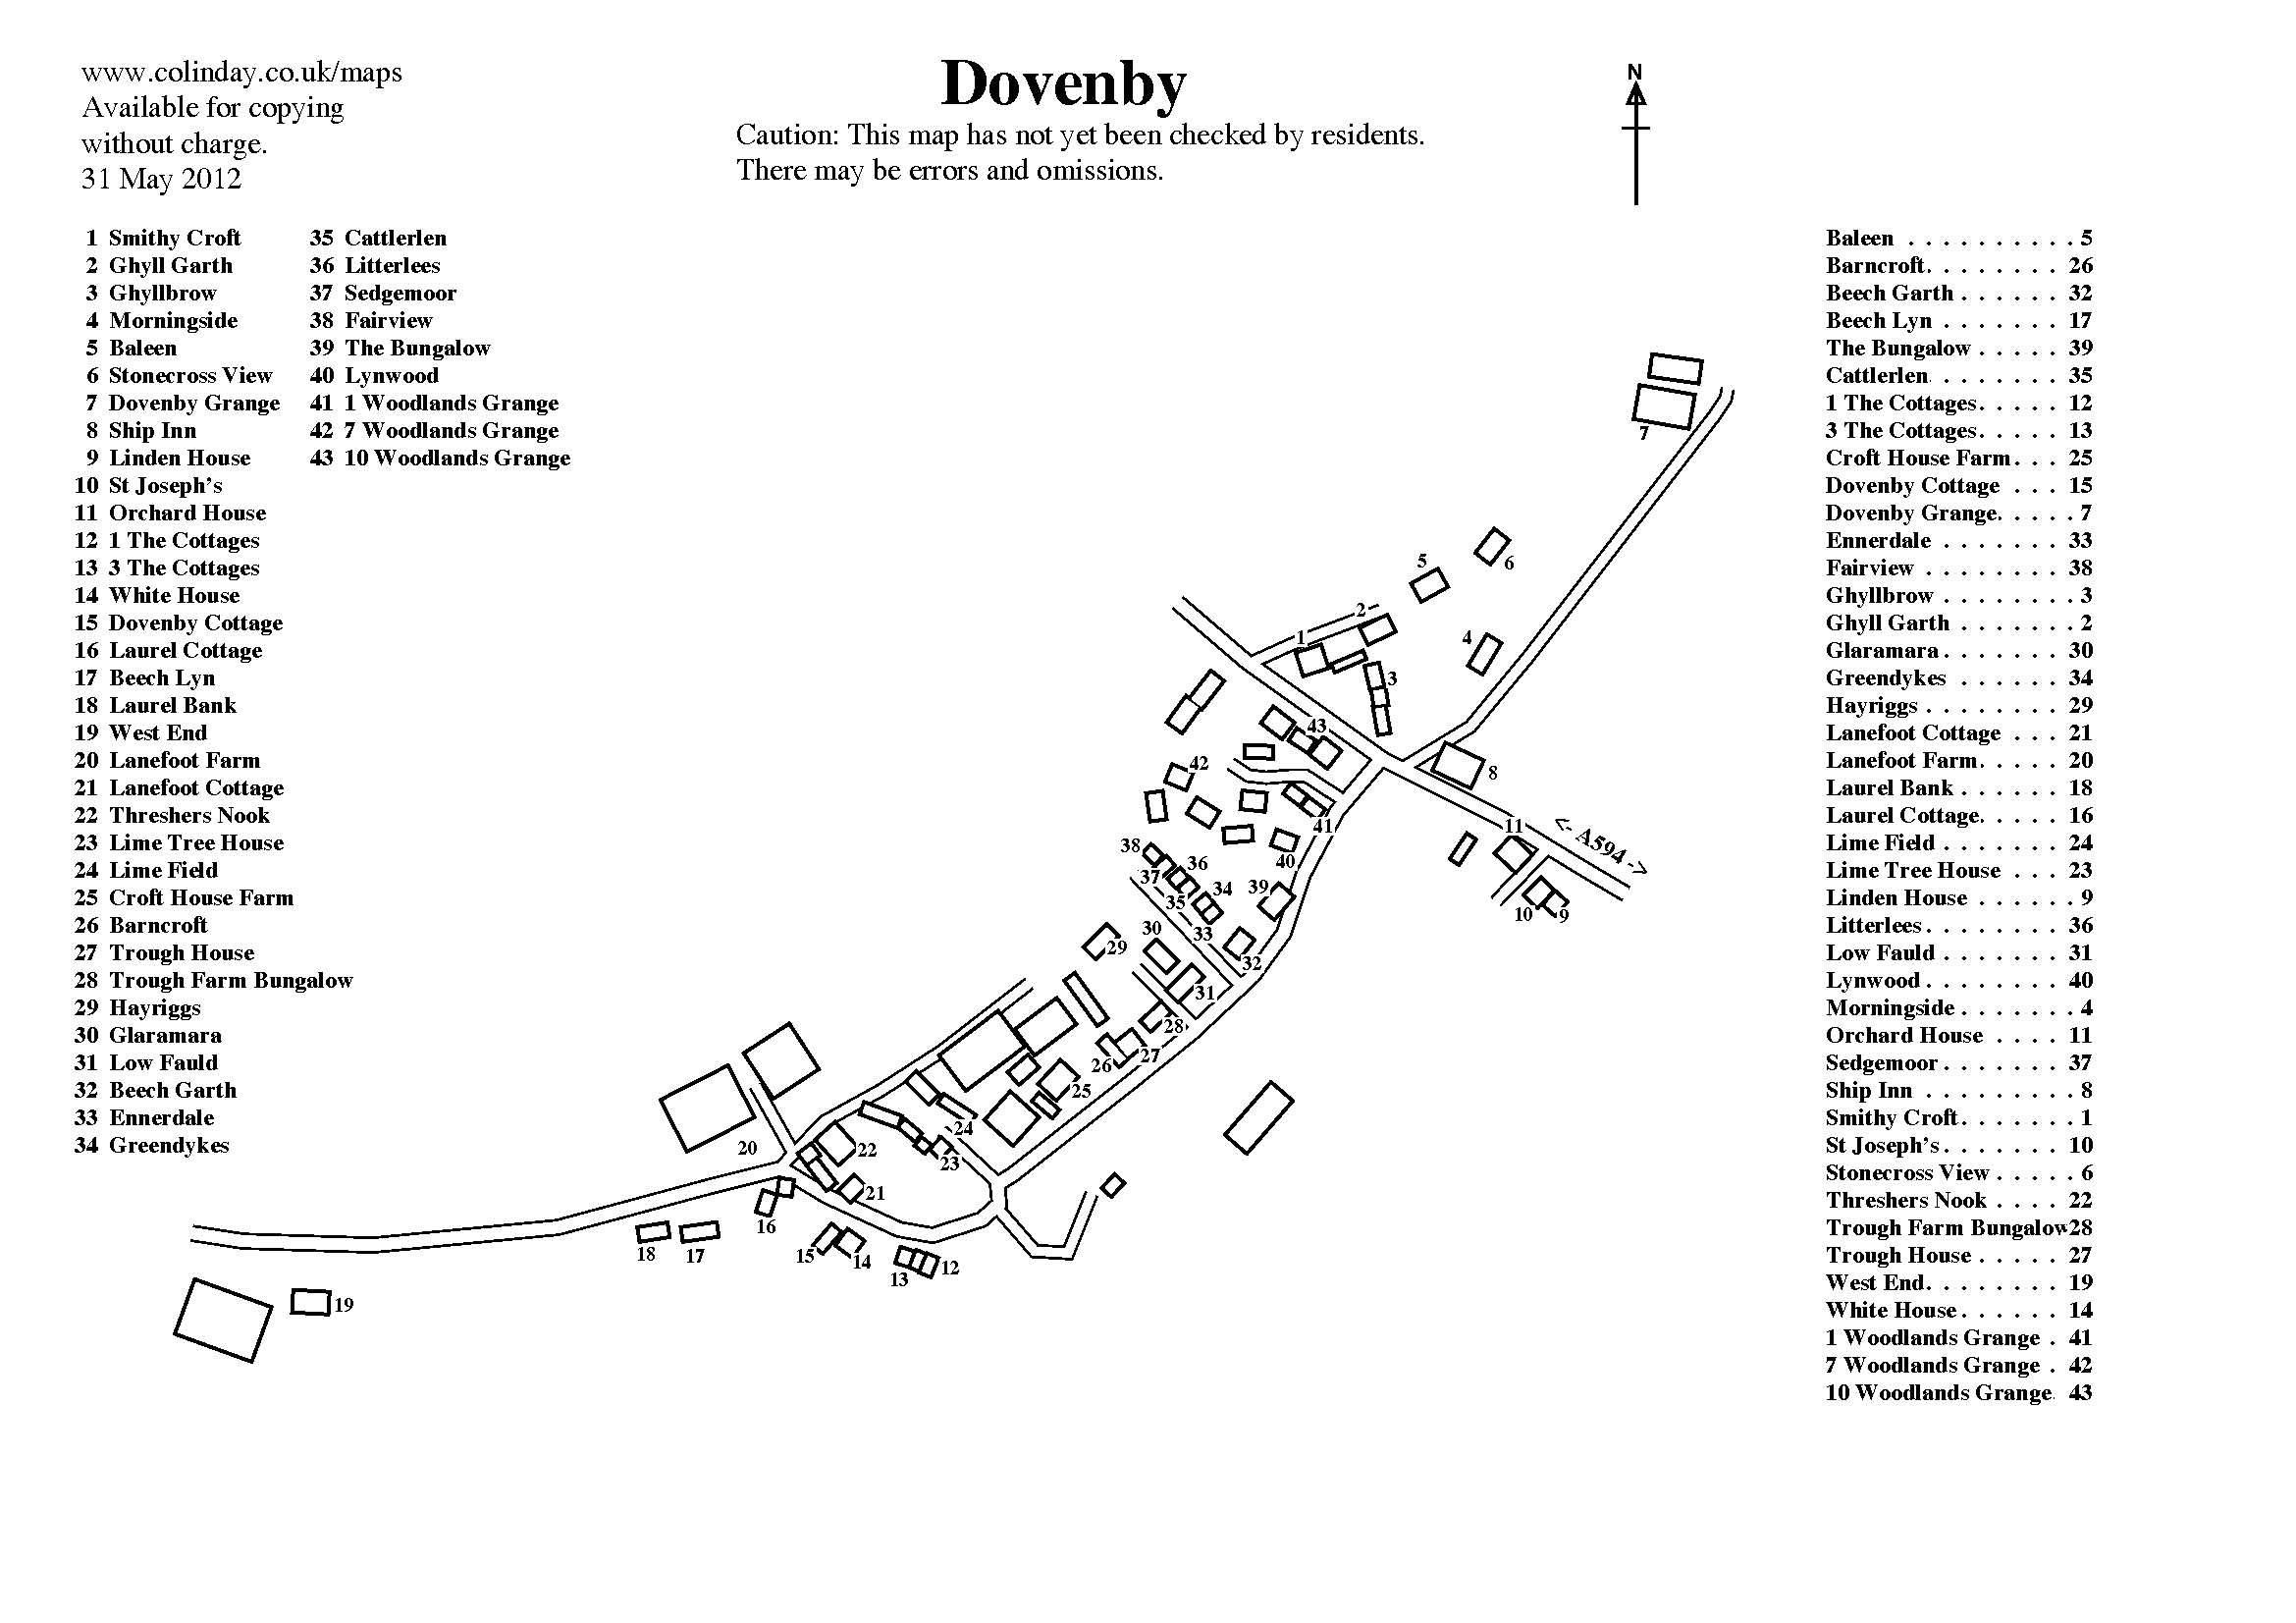 2012 Dovenby Map Of Houses